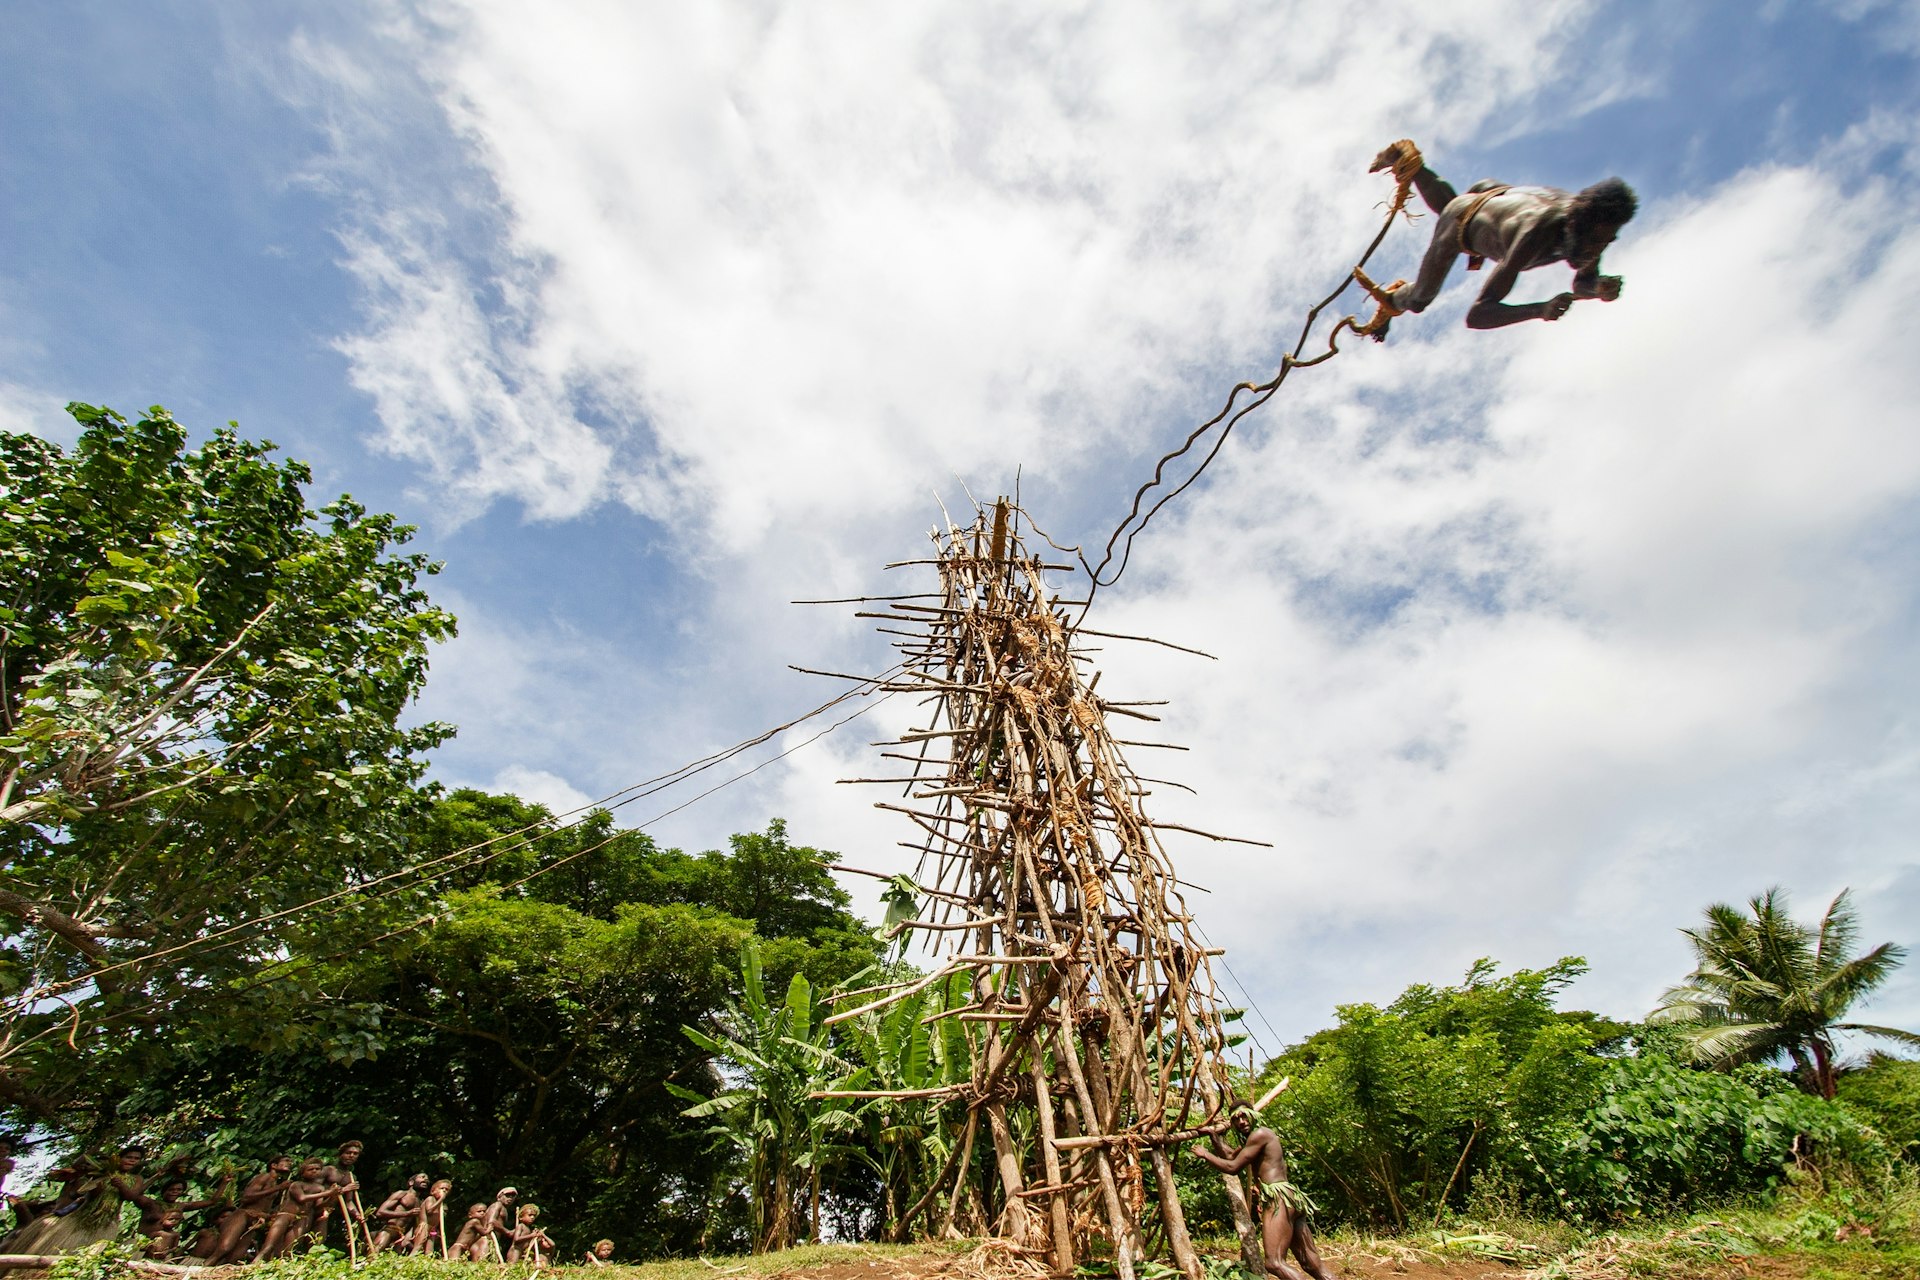 A person with vines attached to their leg flies down towards the ground from a makeshift tower